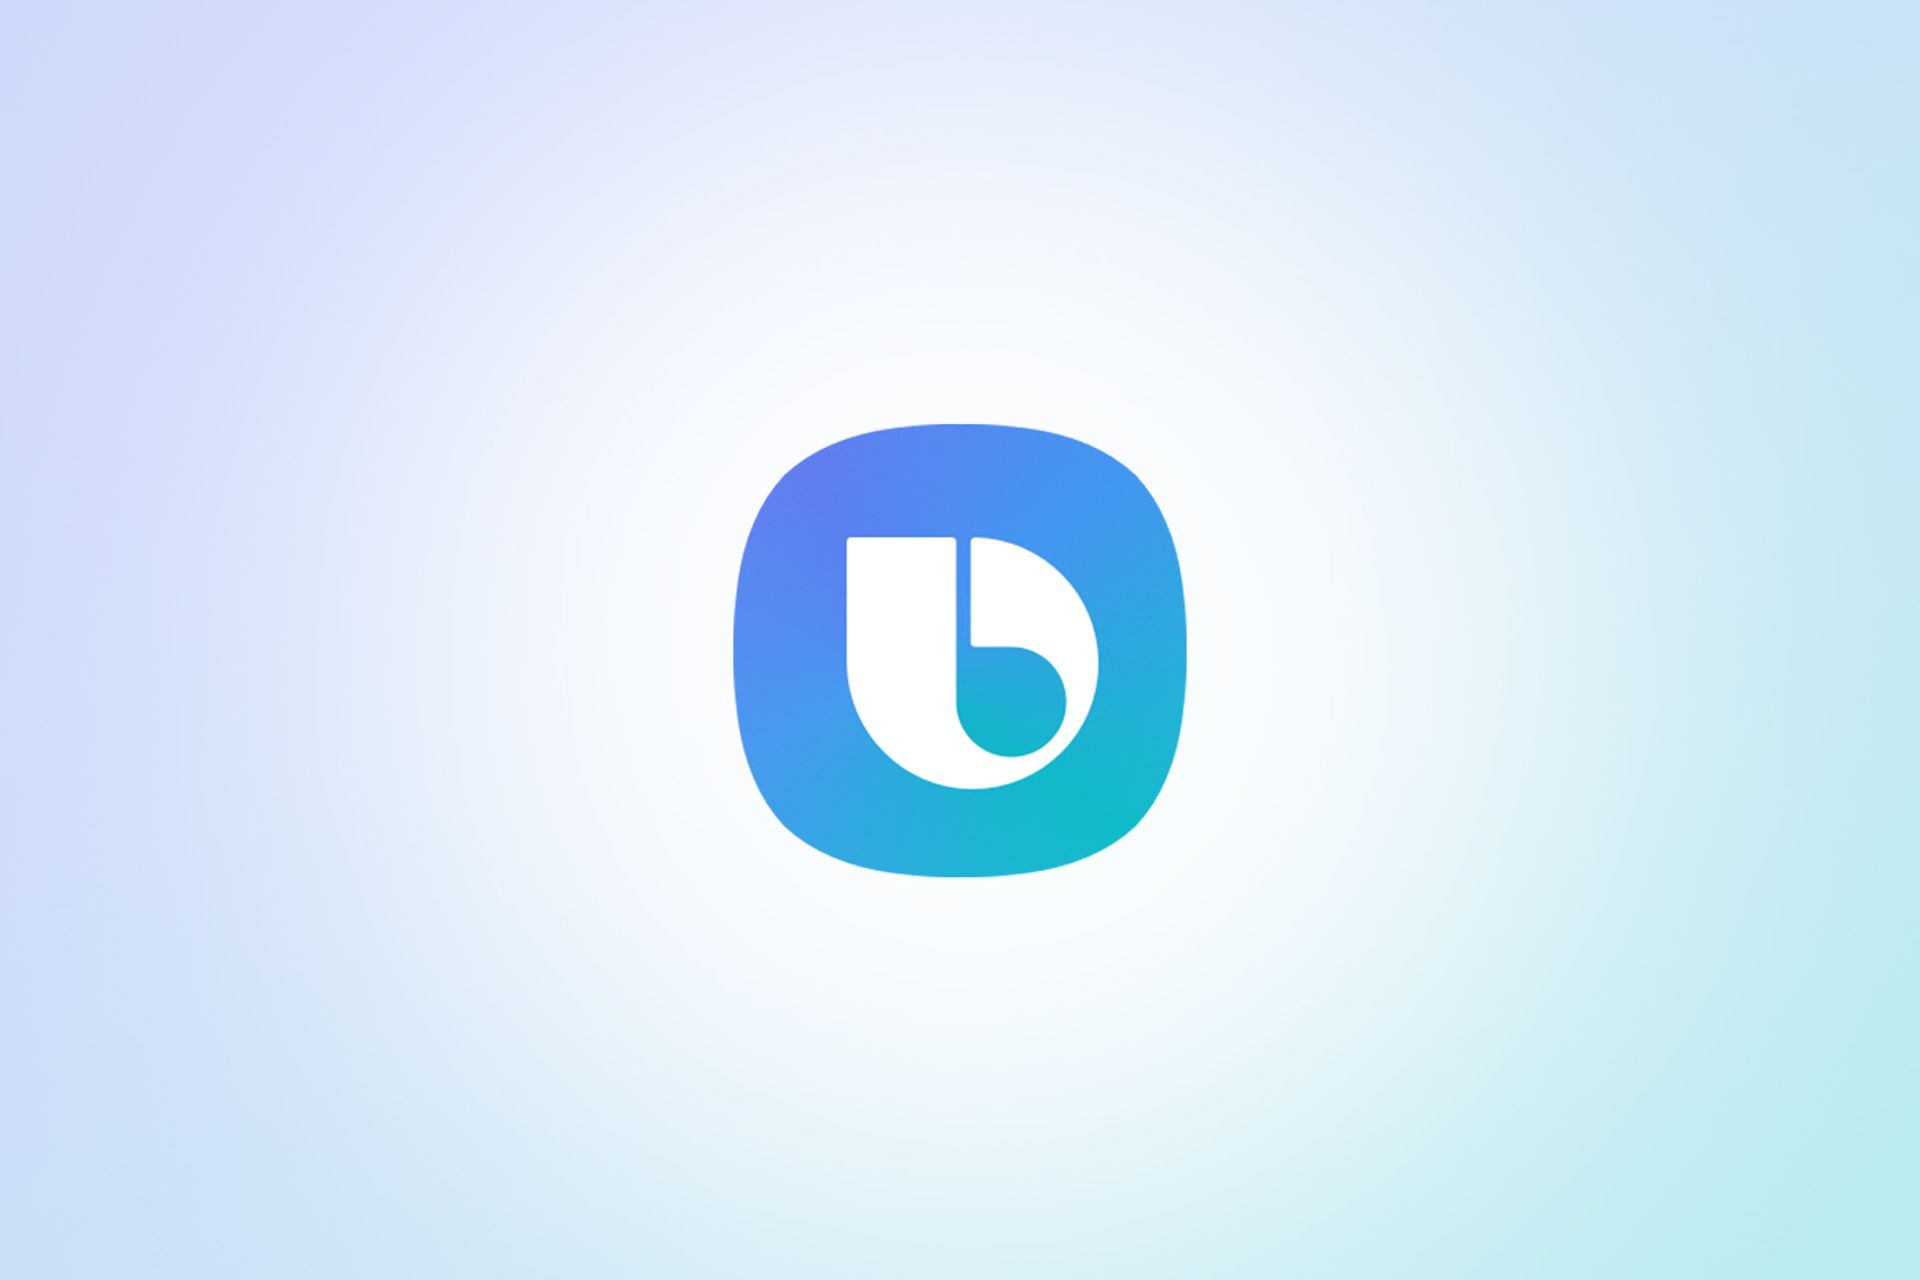 Samsung is infusing Bixby with AI superpowers for a revival